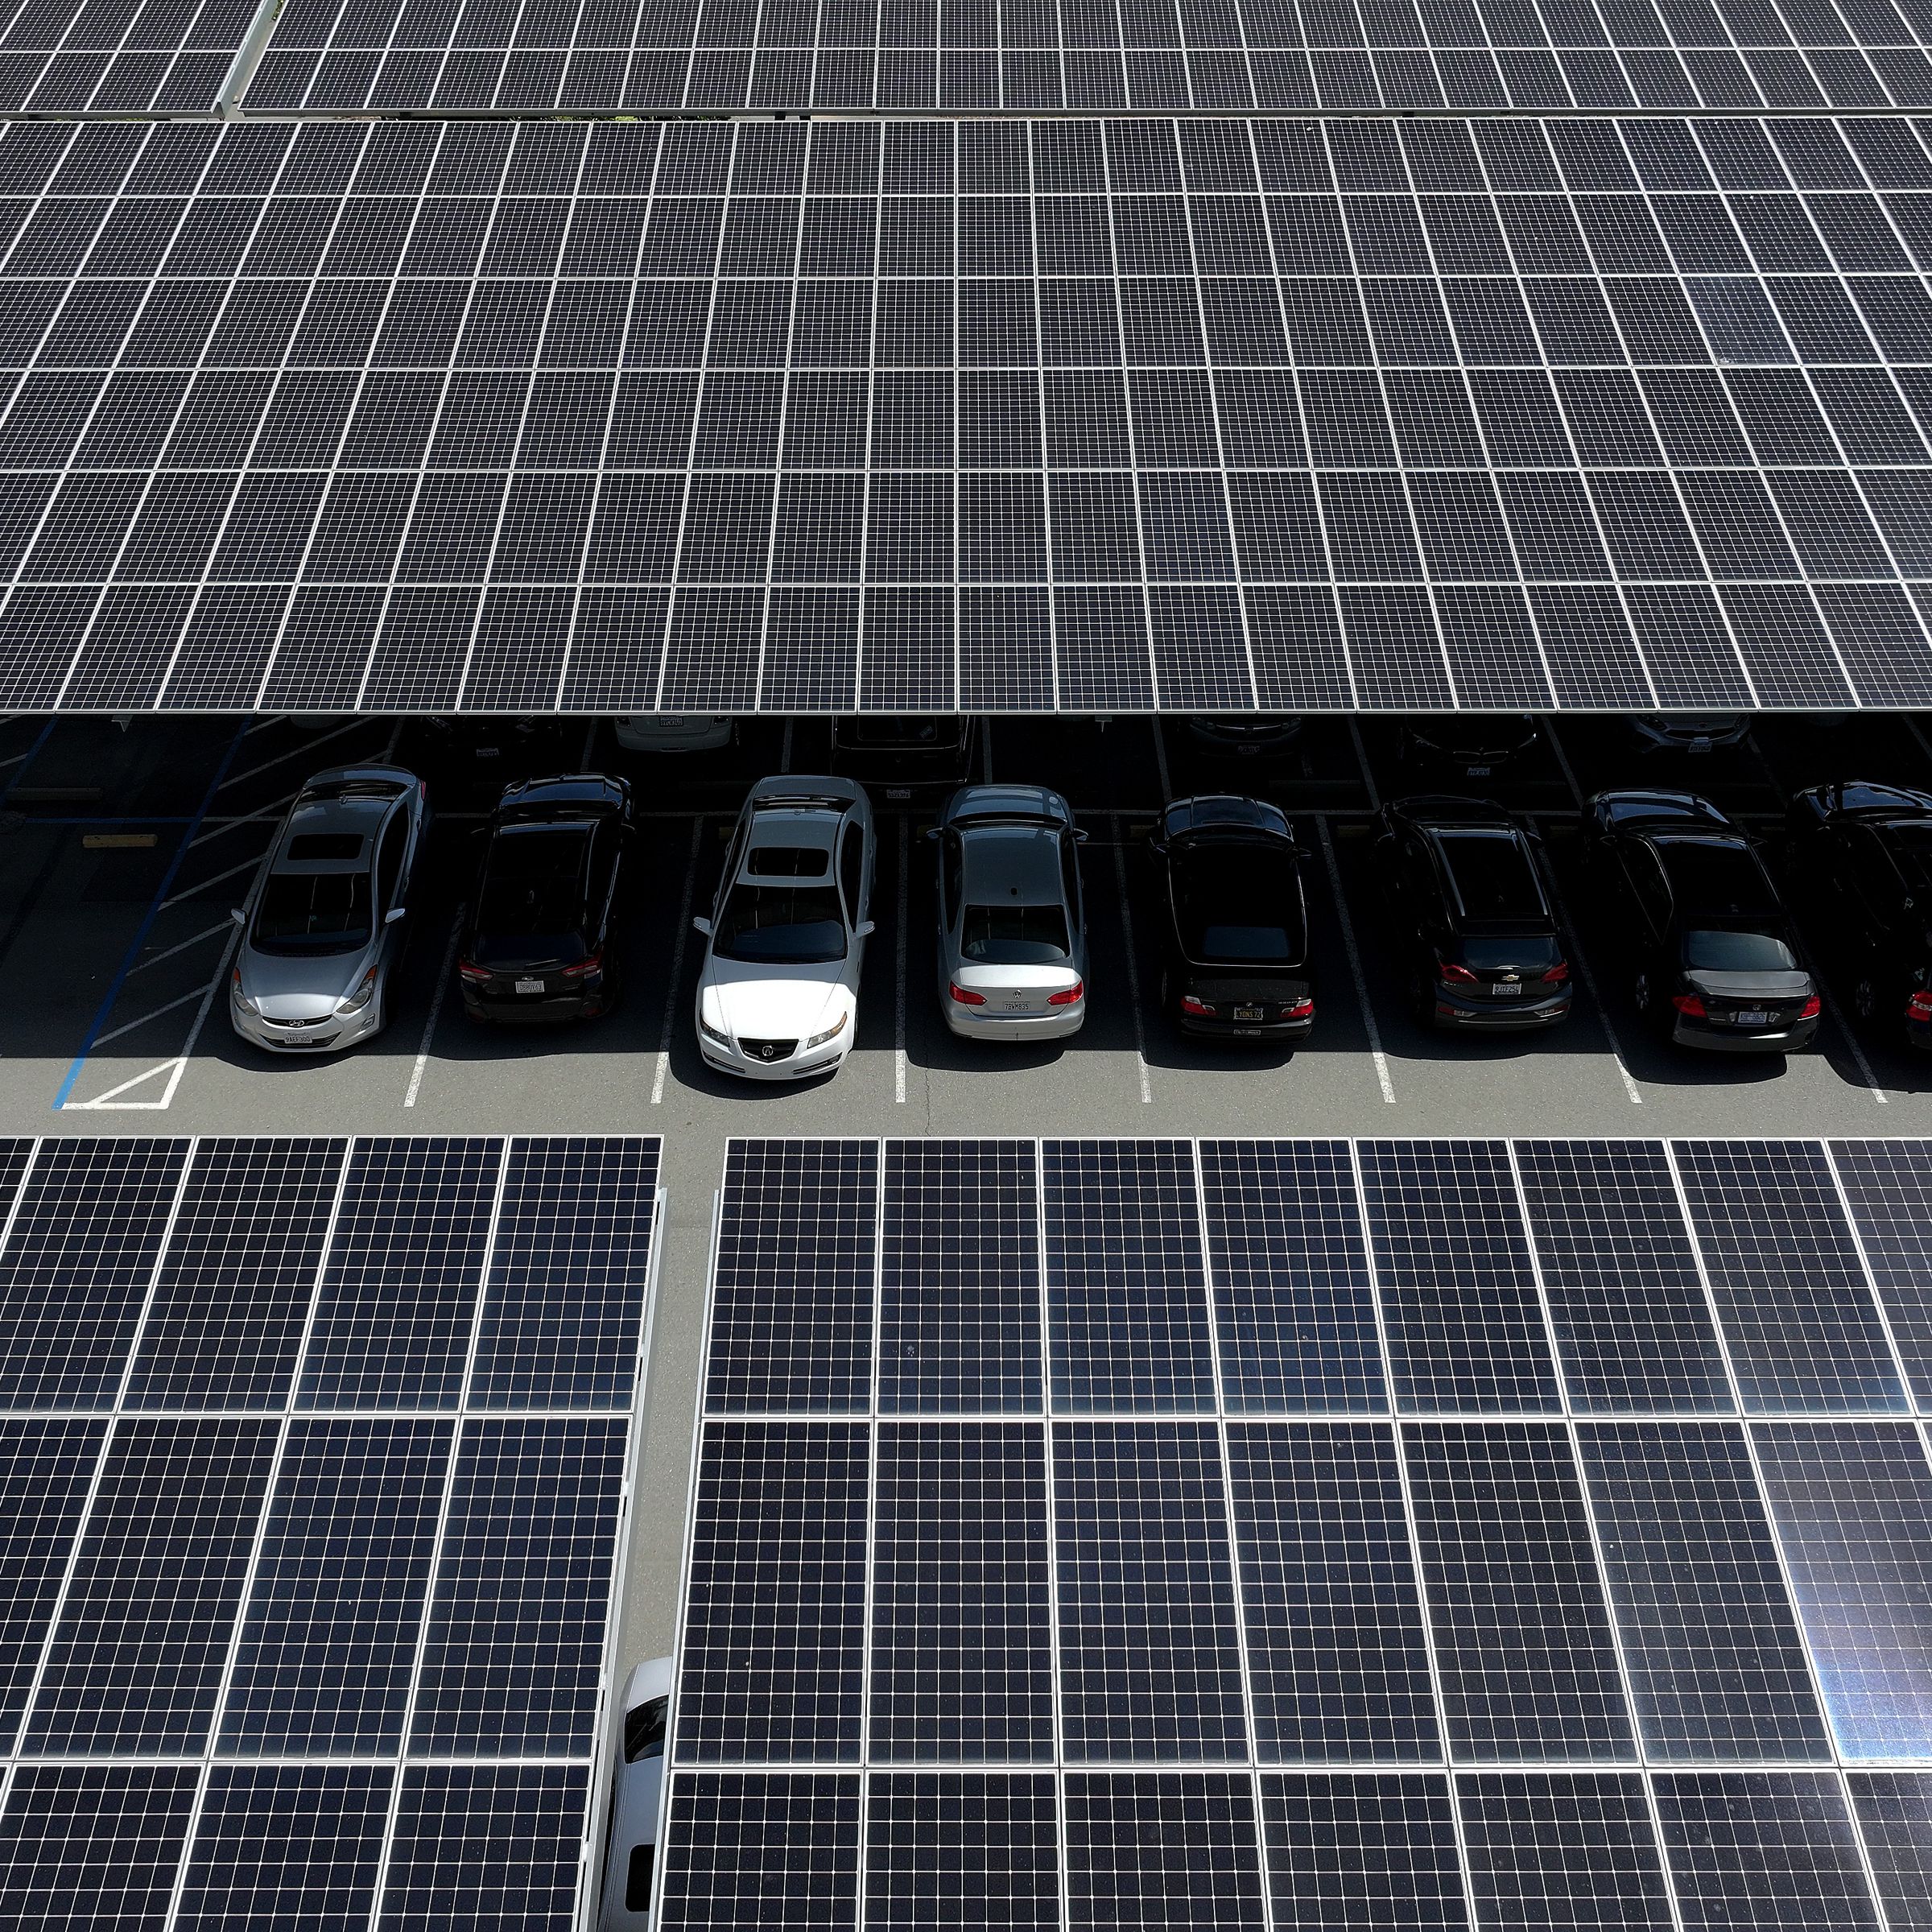 In an aerial view, solar panels are seen in a parking lot shading cars parked underneath them.